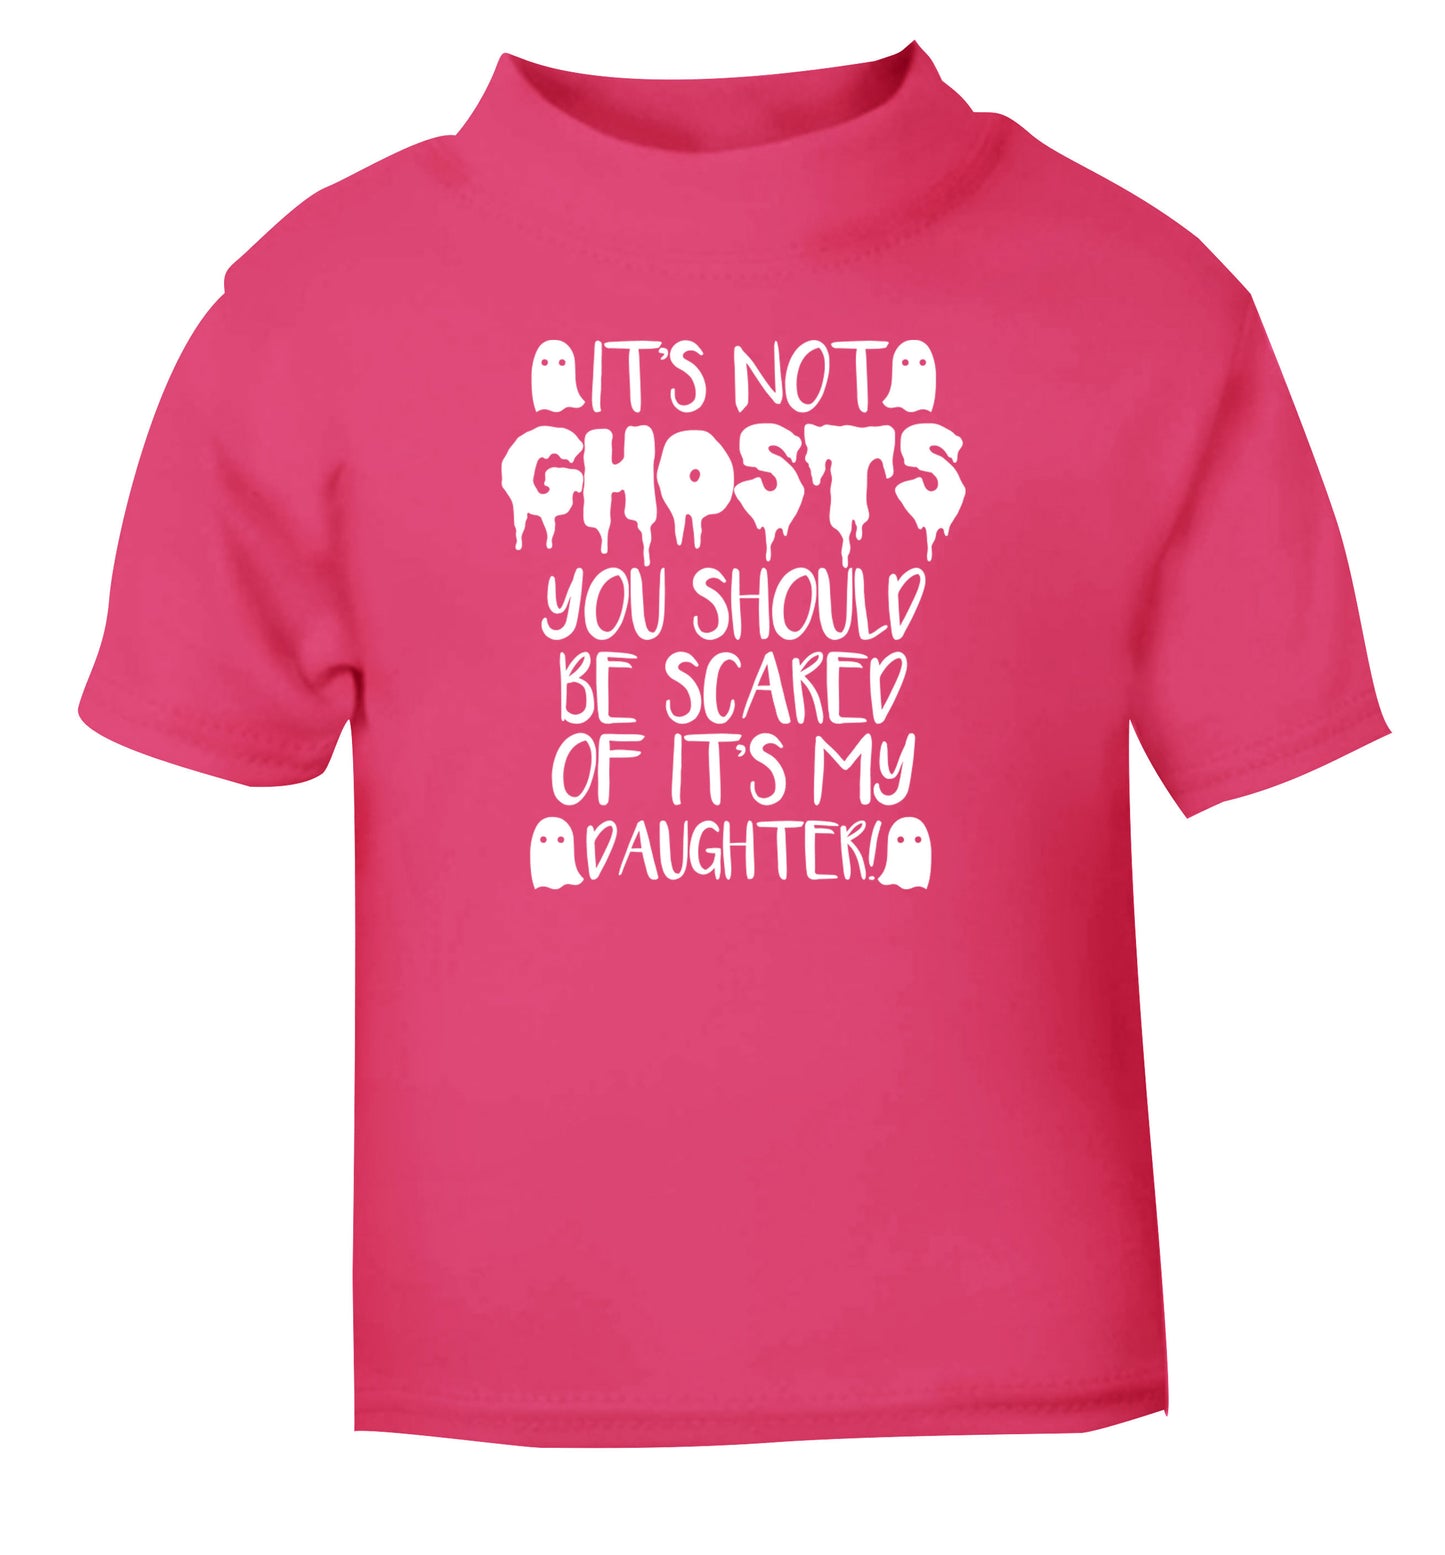 It's not ghosts you should be scared of it's my daughter! pink Baby Toddler Tshirt 2 Years